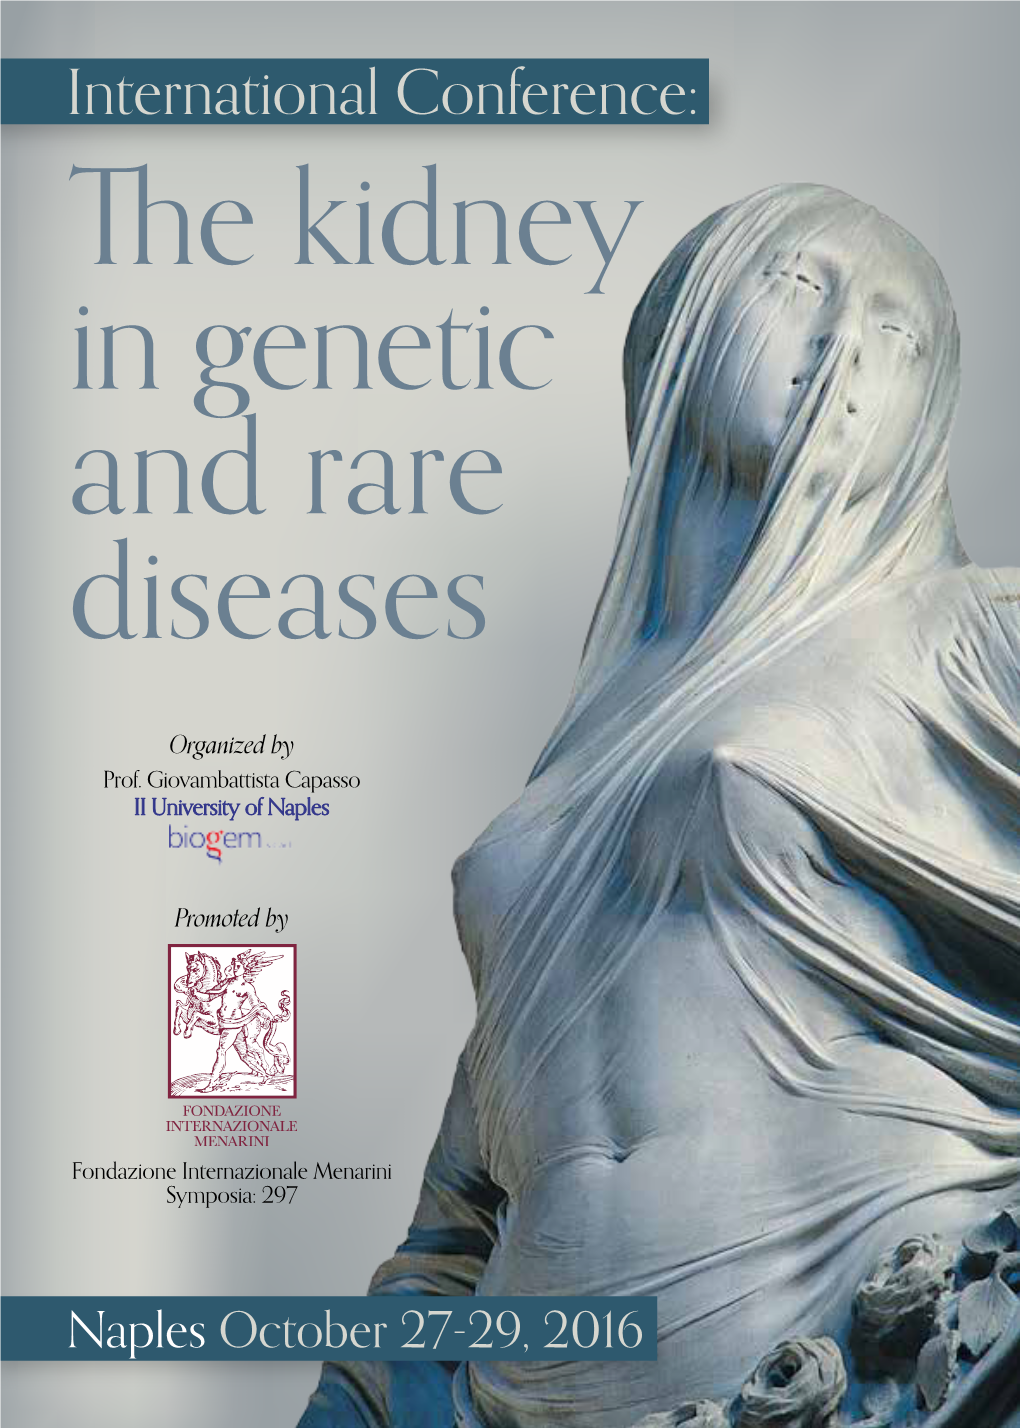 The Kidney in Genetic and Rare Diseases